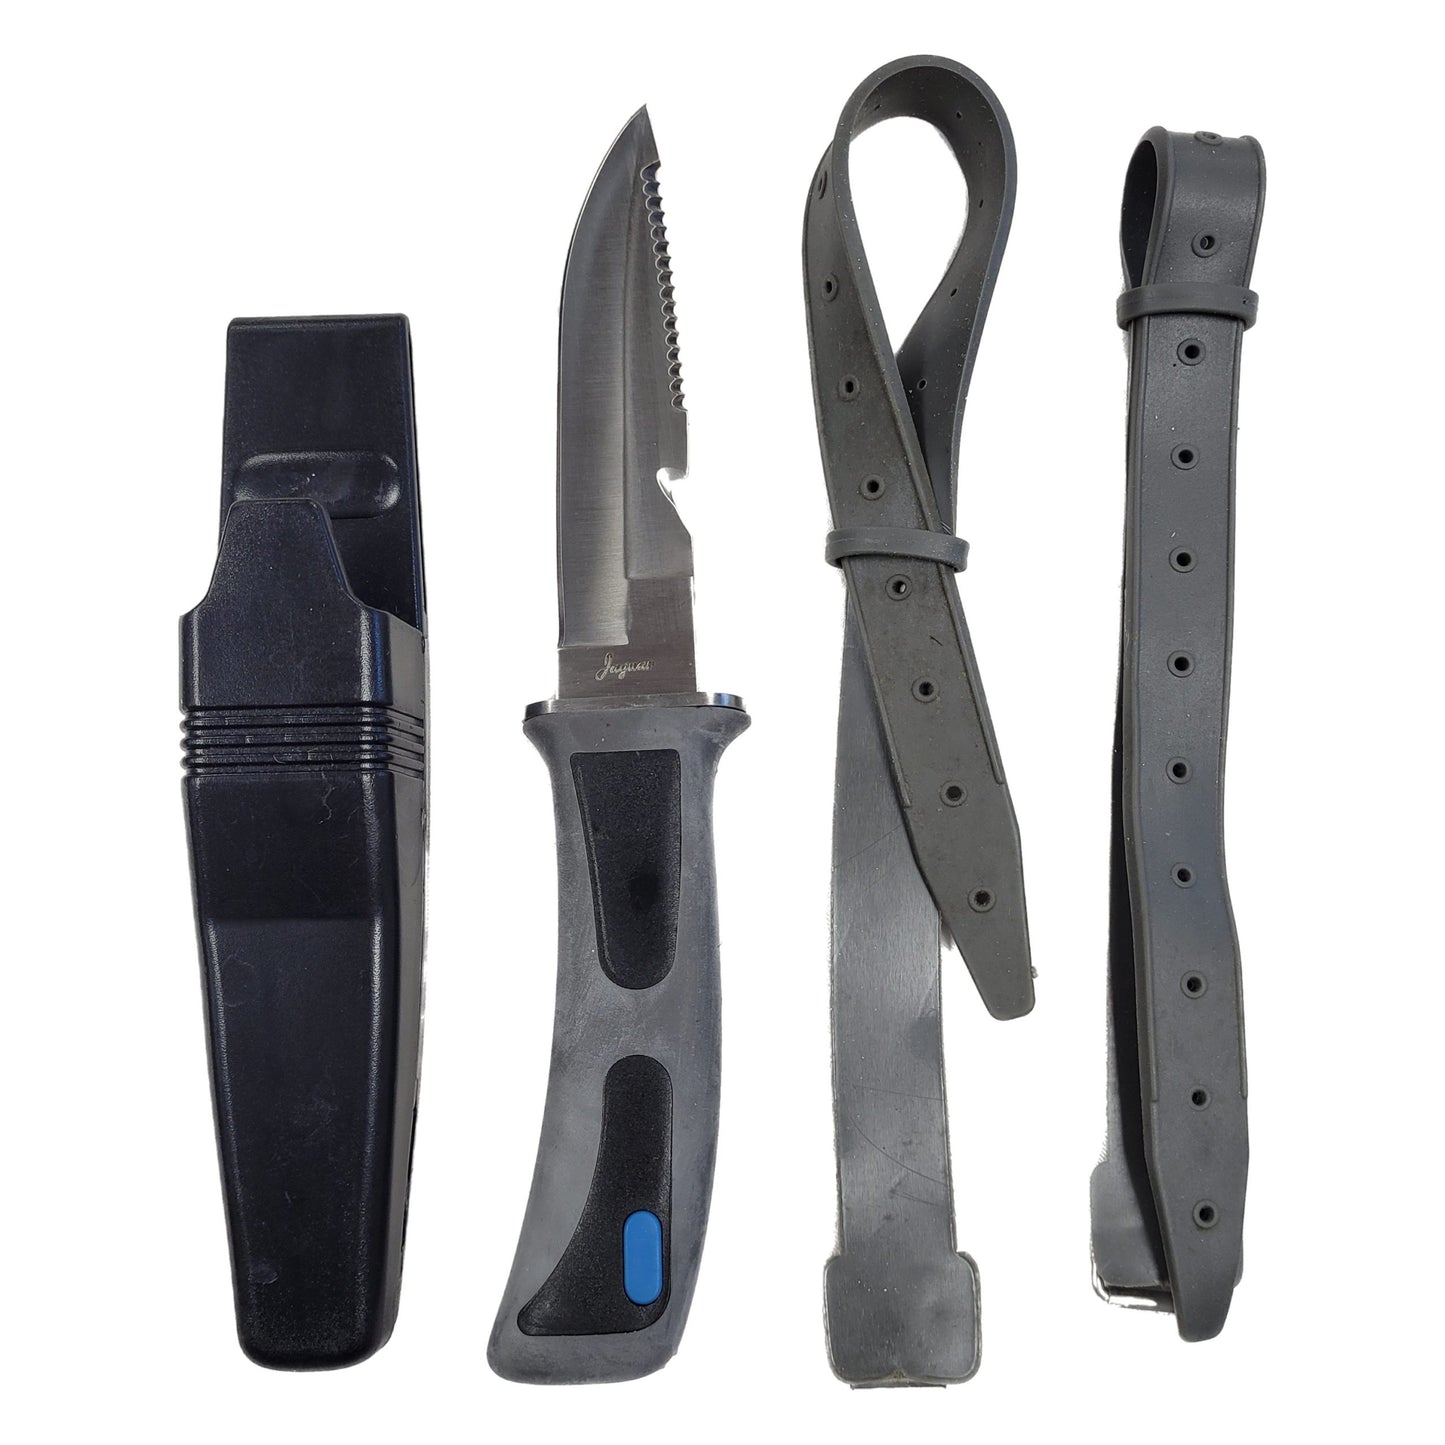 Jaguar Stainless Steel Diver's Knife with Sheath